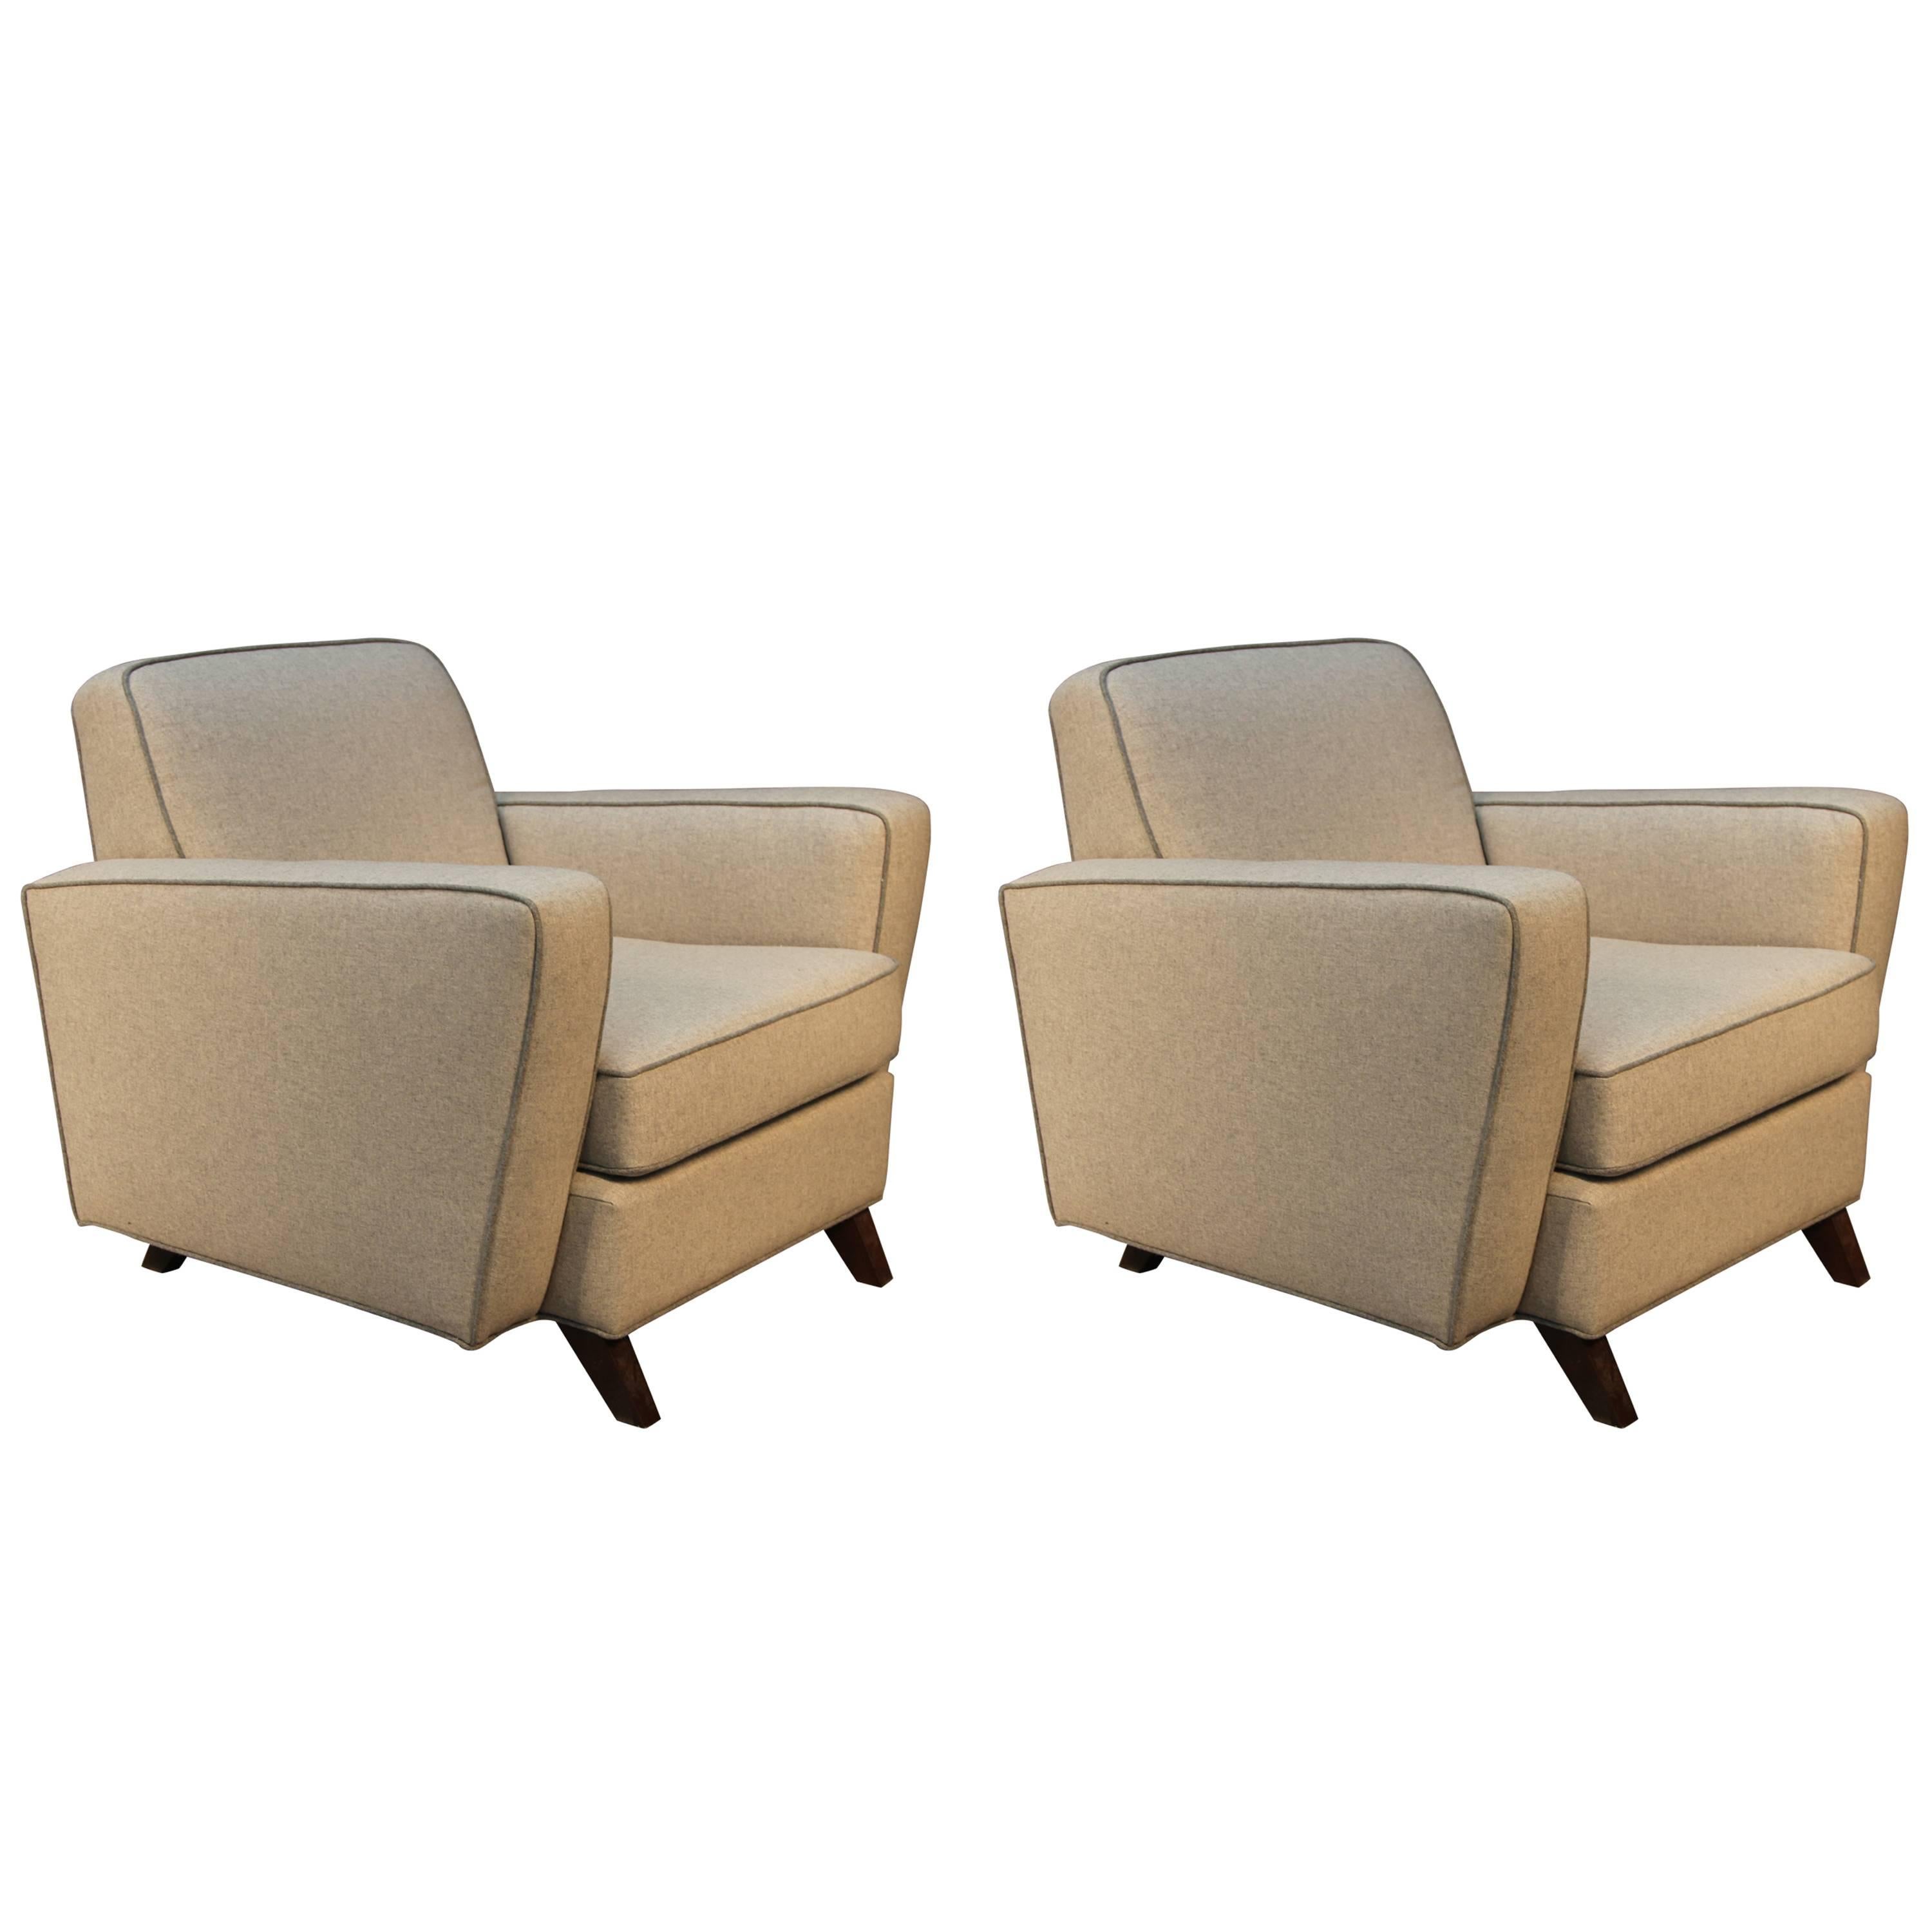 Pair of Mid-Century Modern Newly Upholstered Club Chairs For Sale